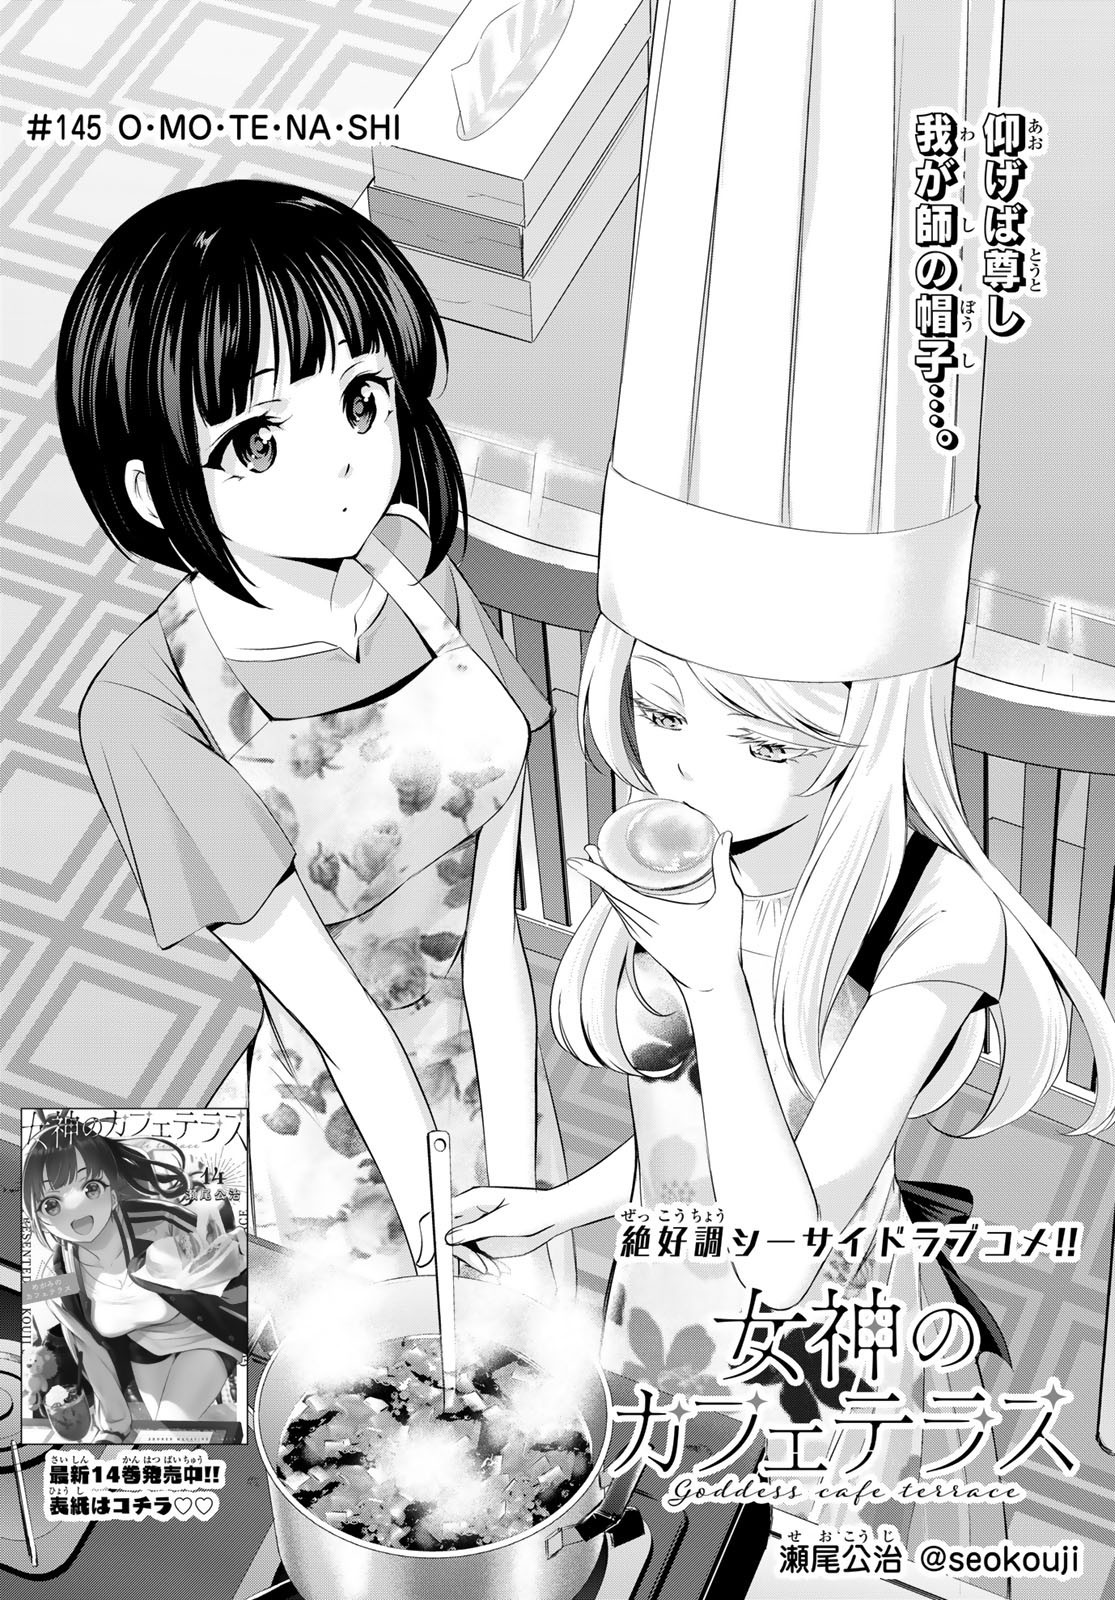 Goddess-Cafe-Terrace - Chapter 145 - Page 2